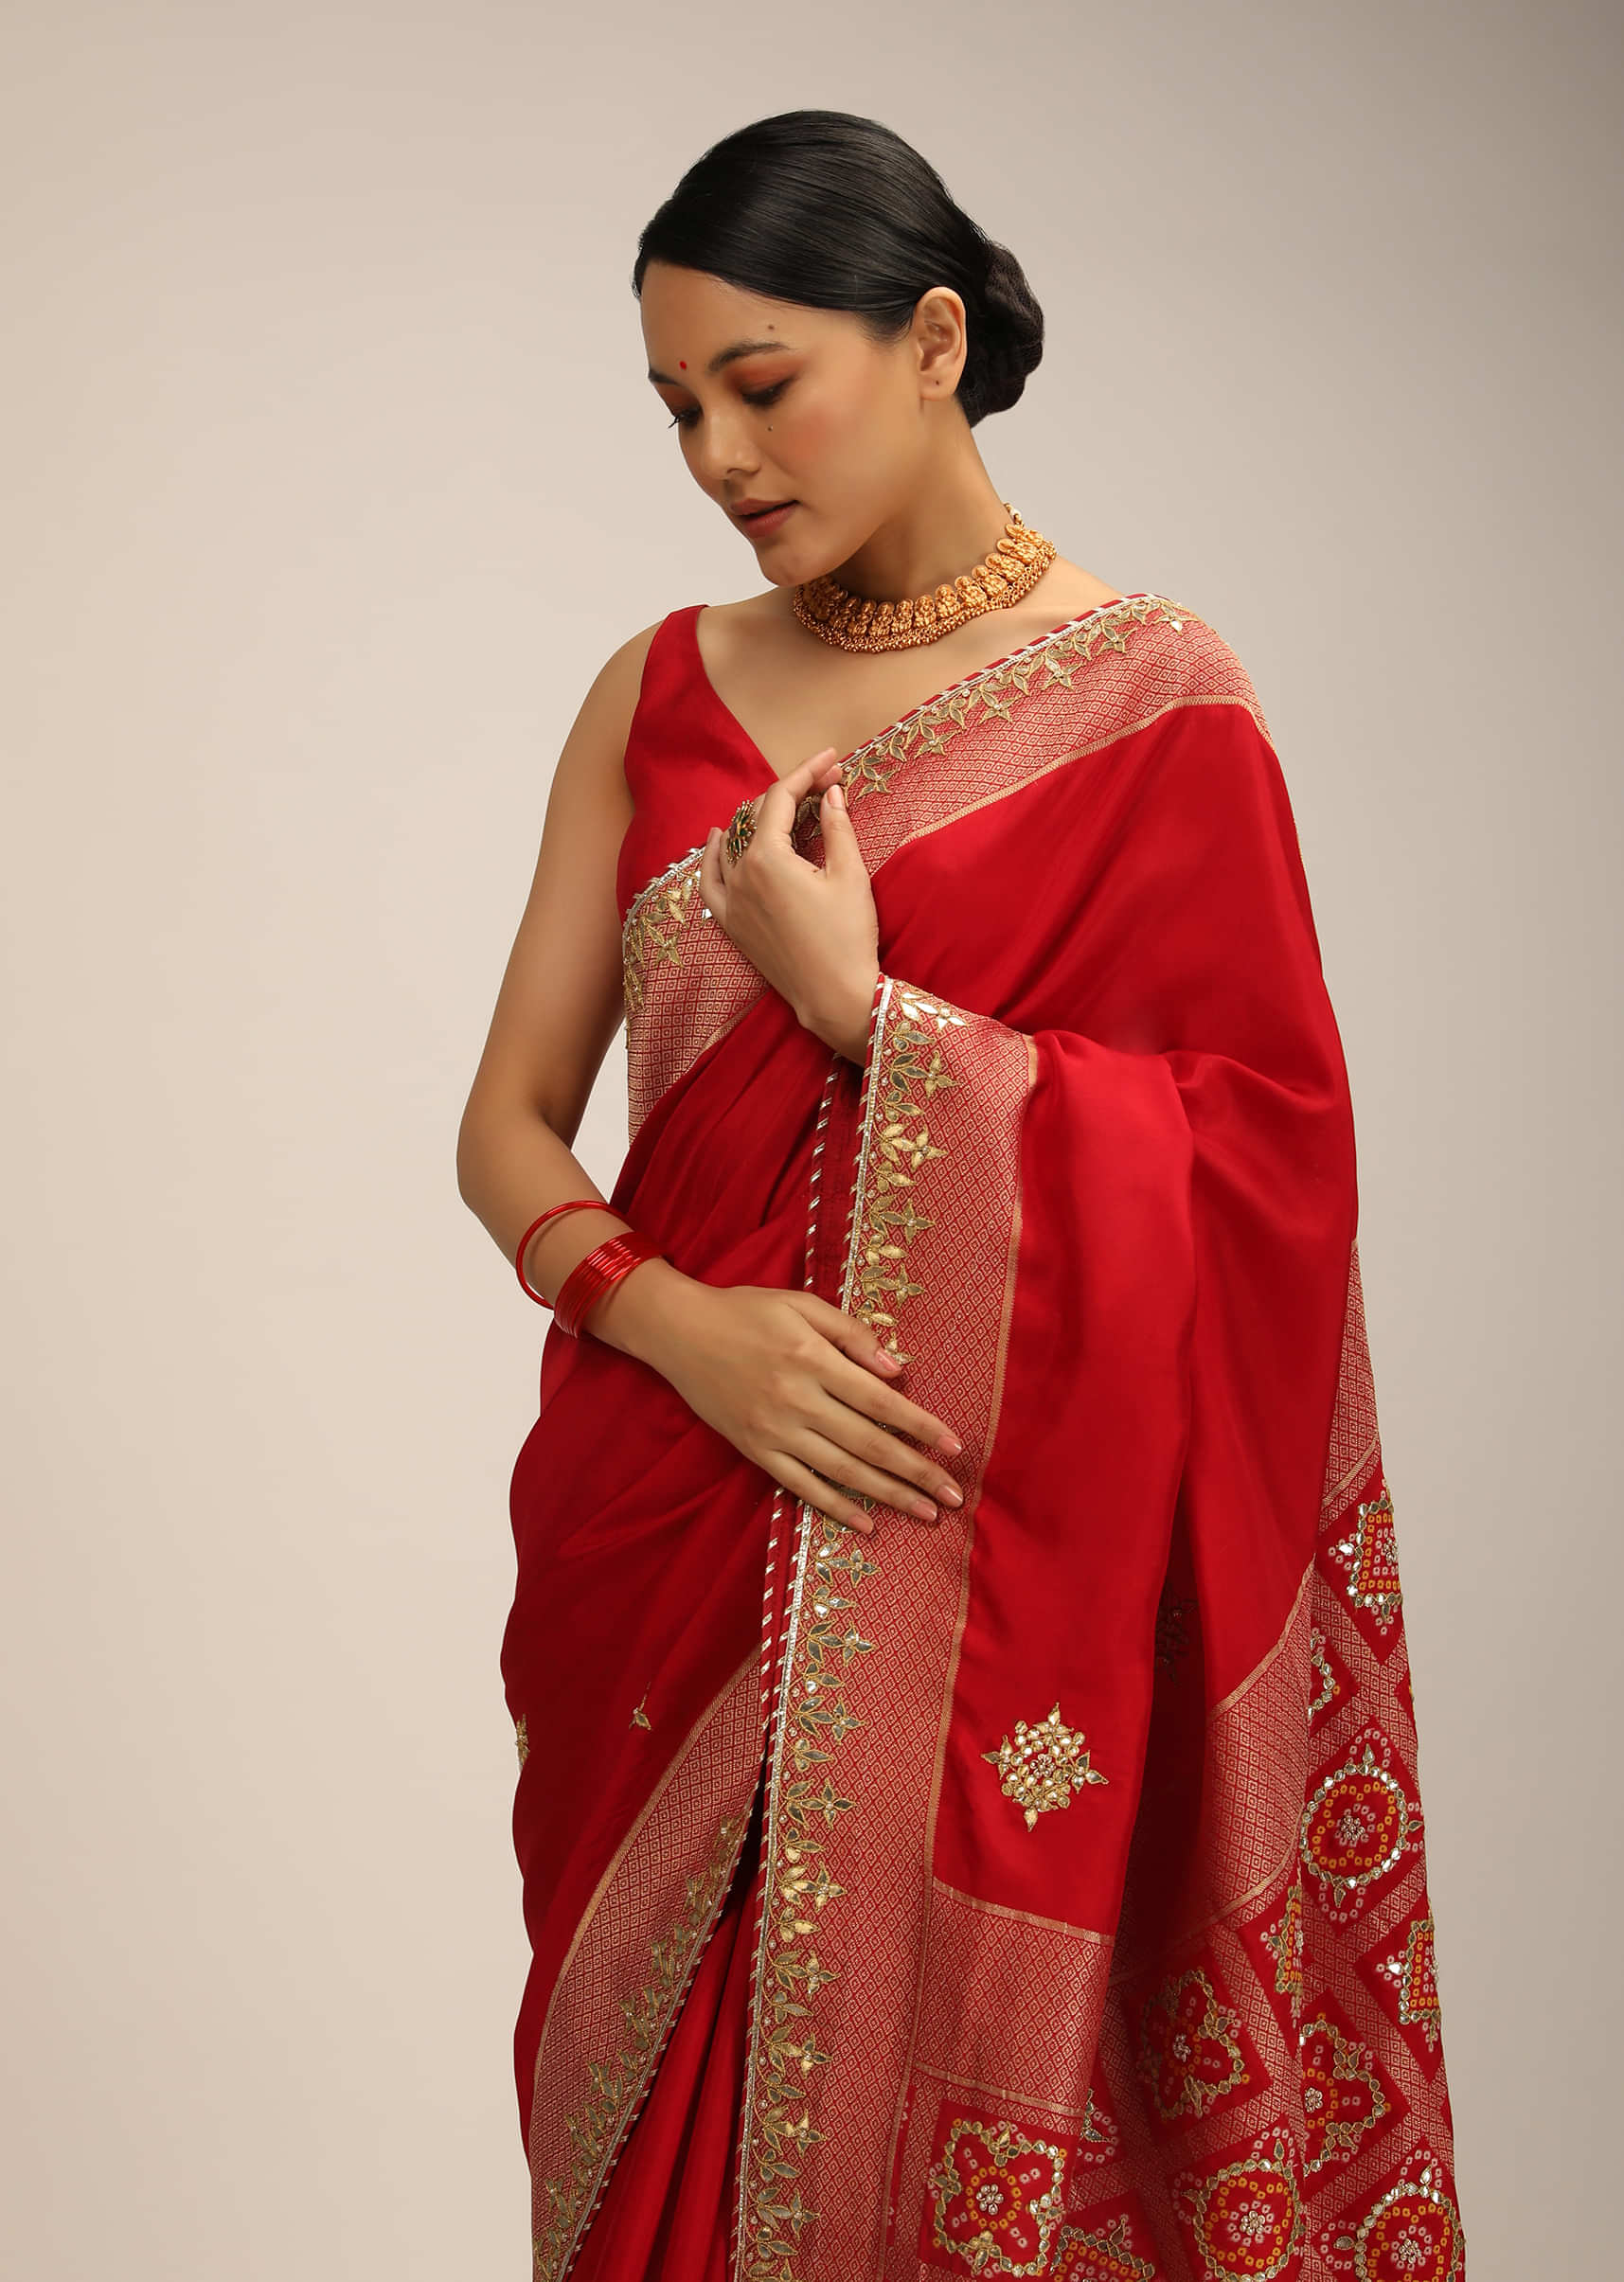 Red Saree In Silk With Brocade Geometric Design On The Pallu And Gotta Embroidery